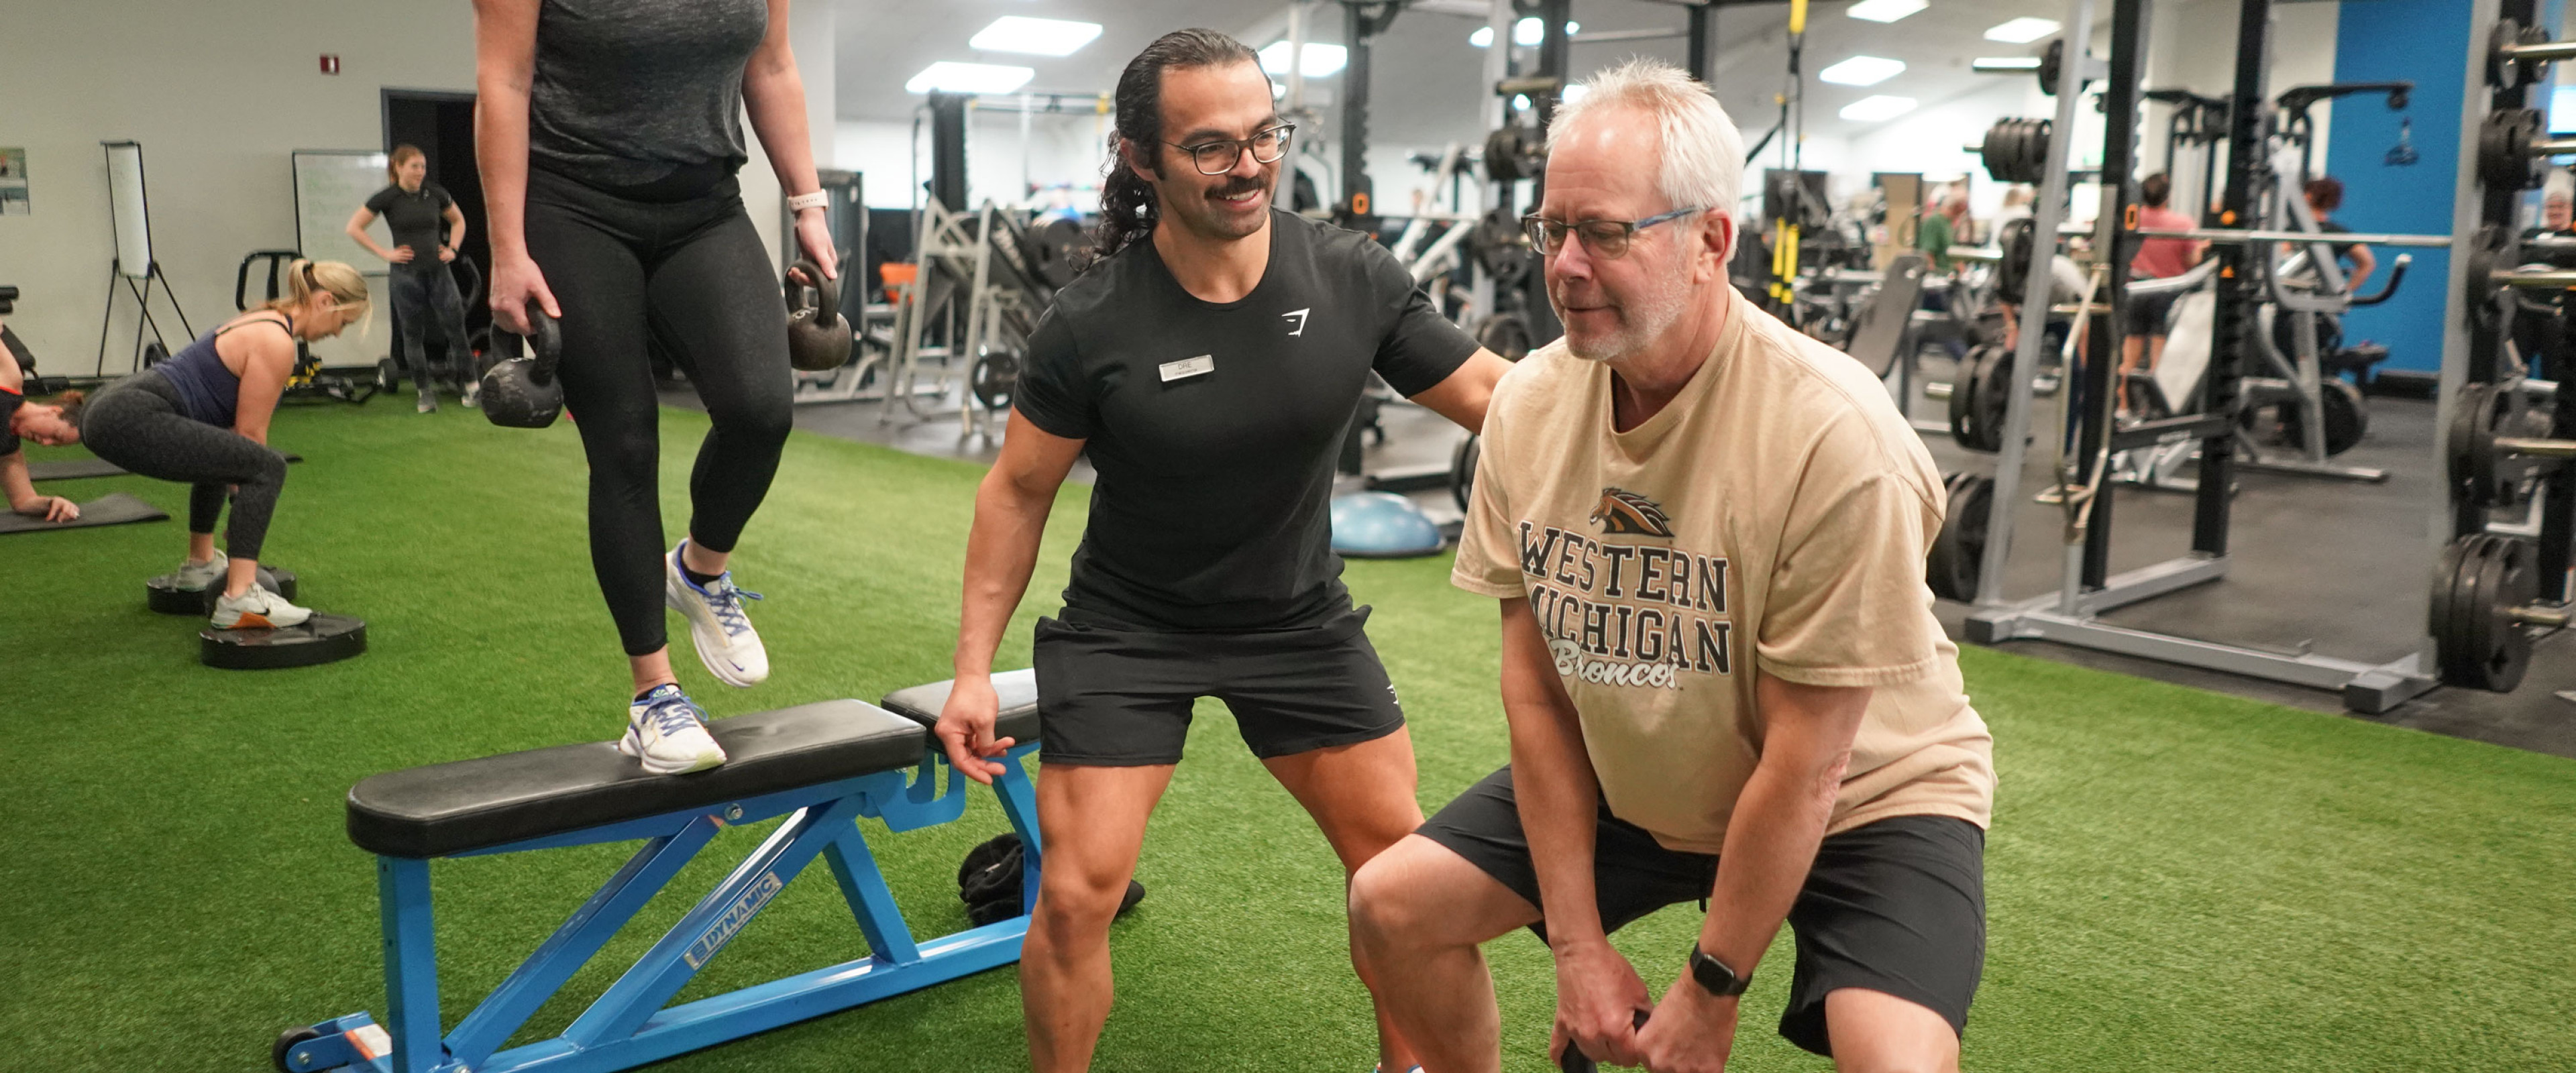 Western Michigan Employee with a personal trainer